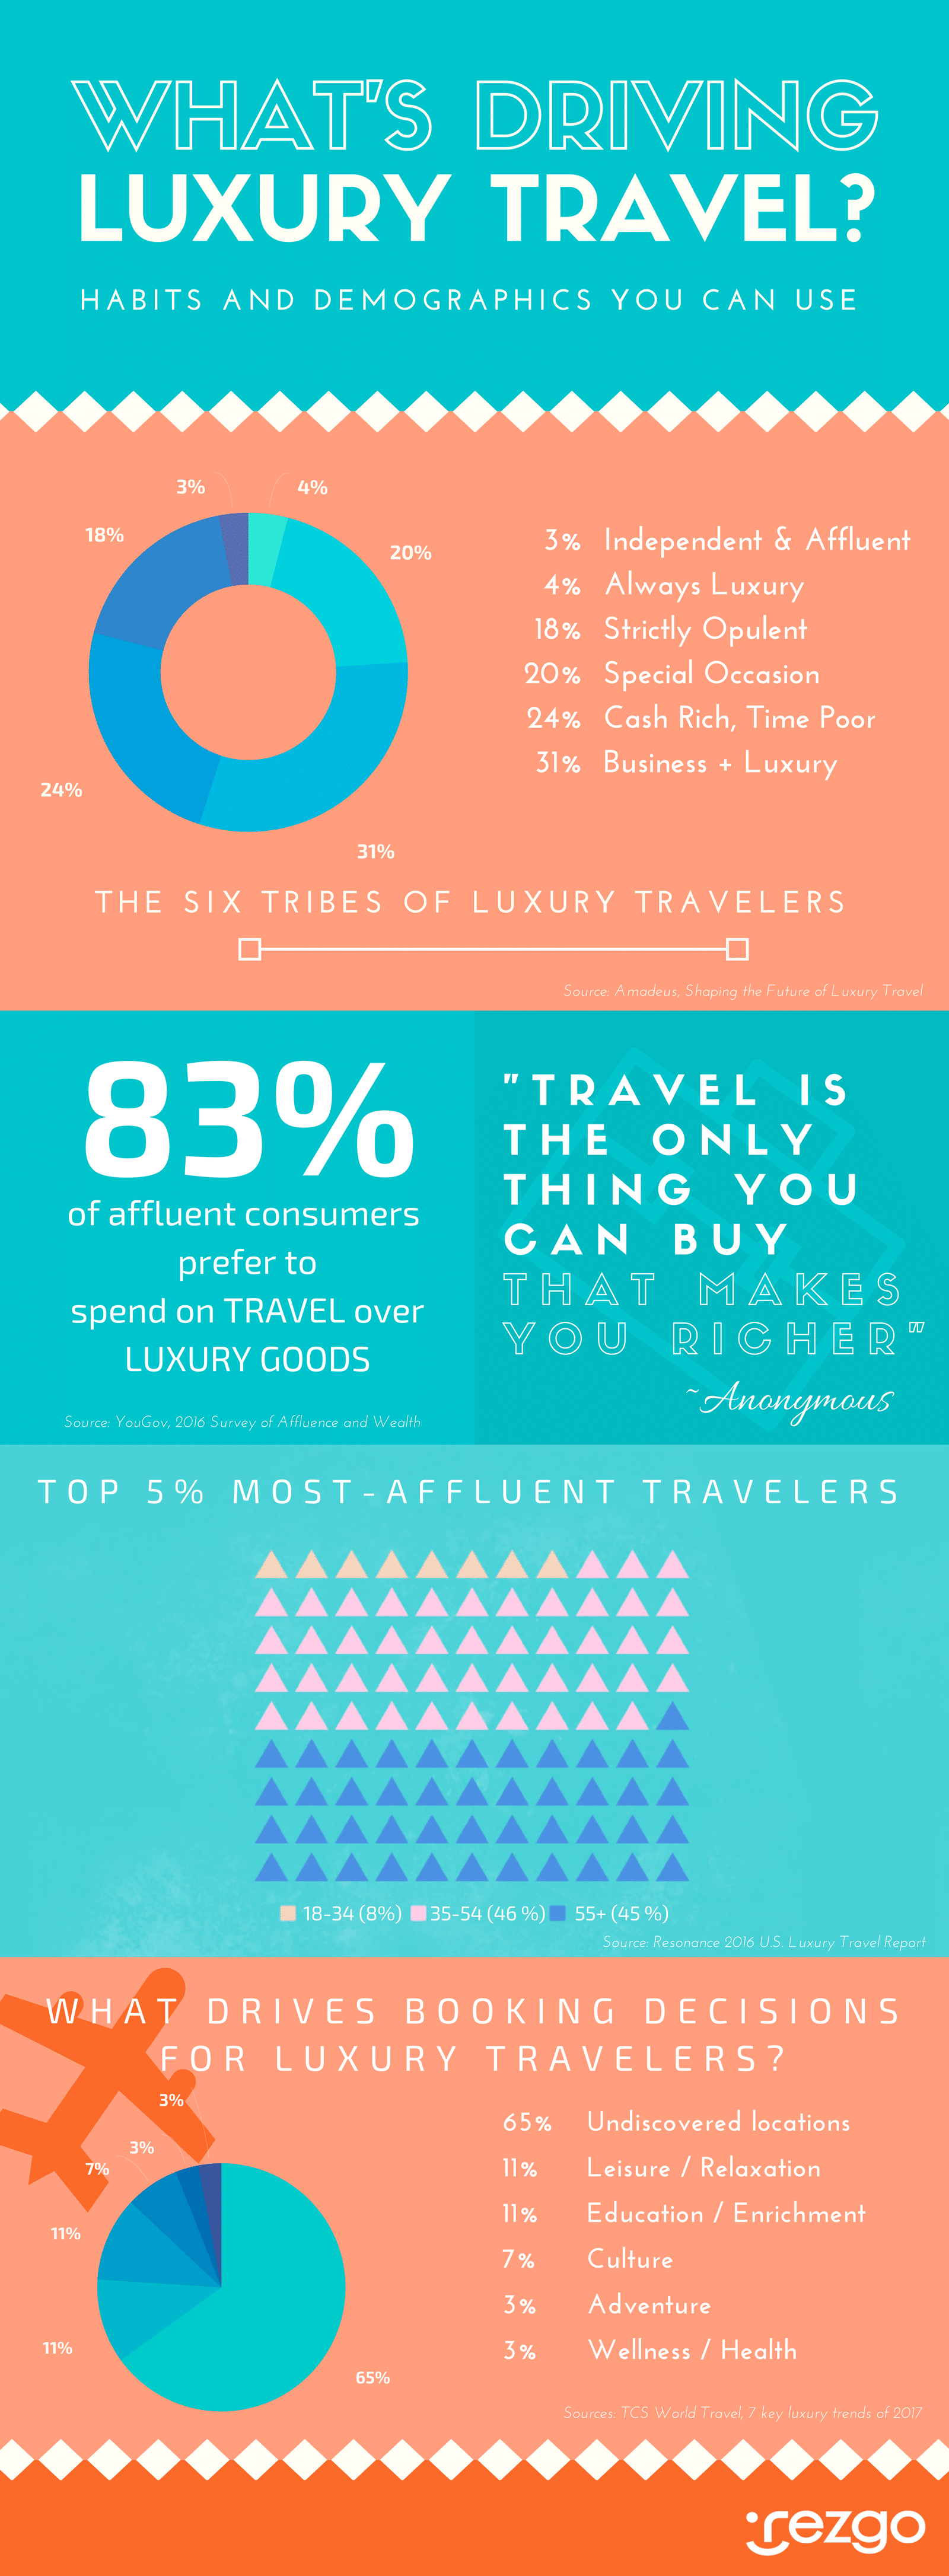 Luxury Travel – What is driving it? Infographic